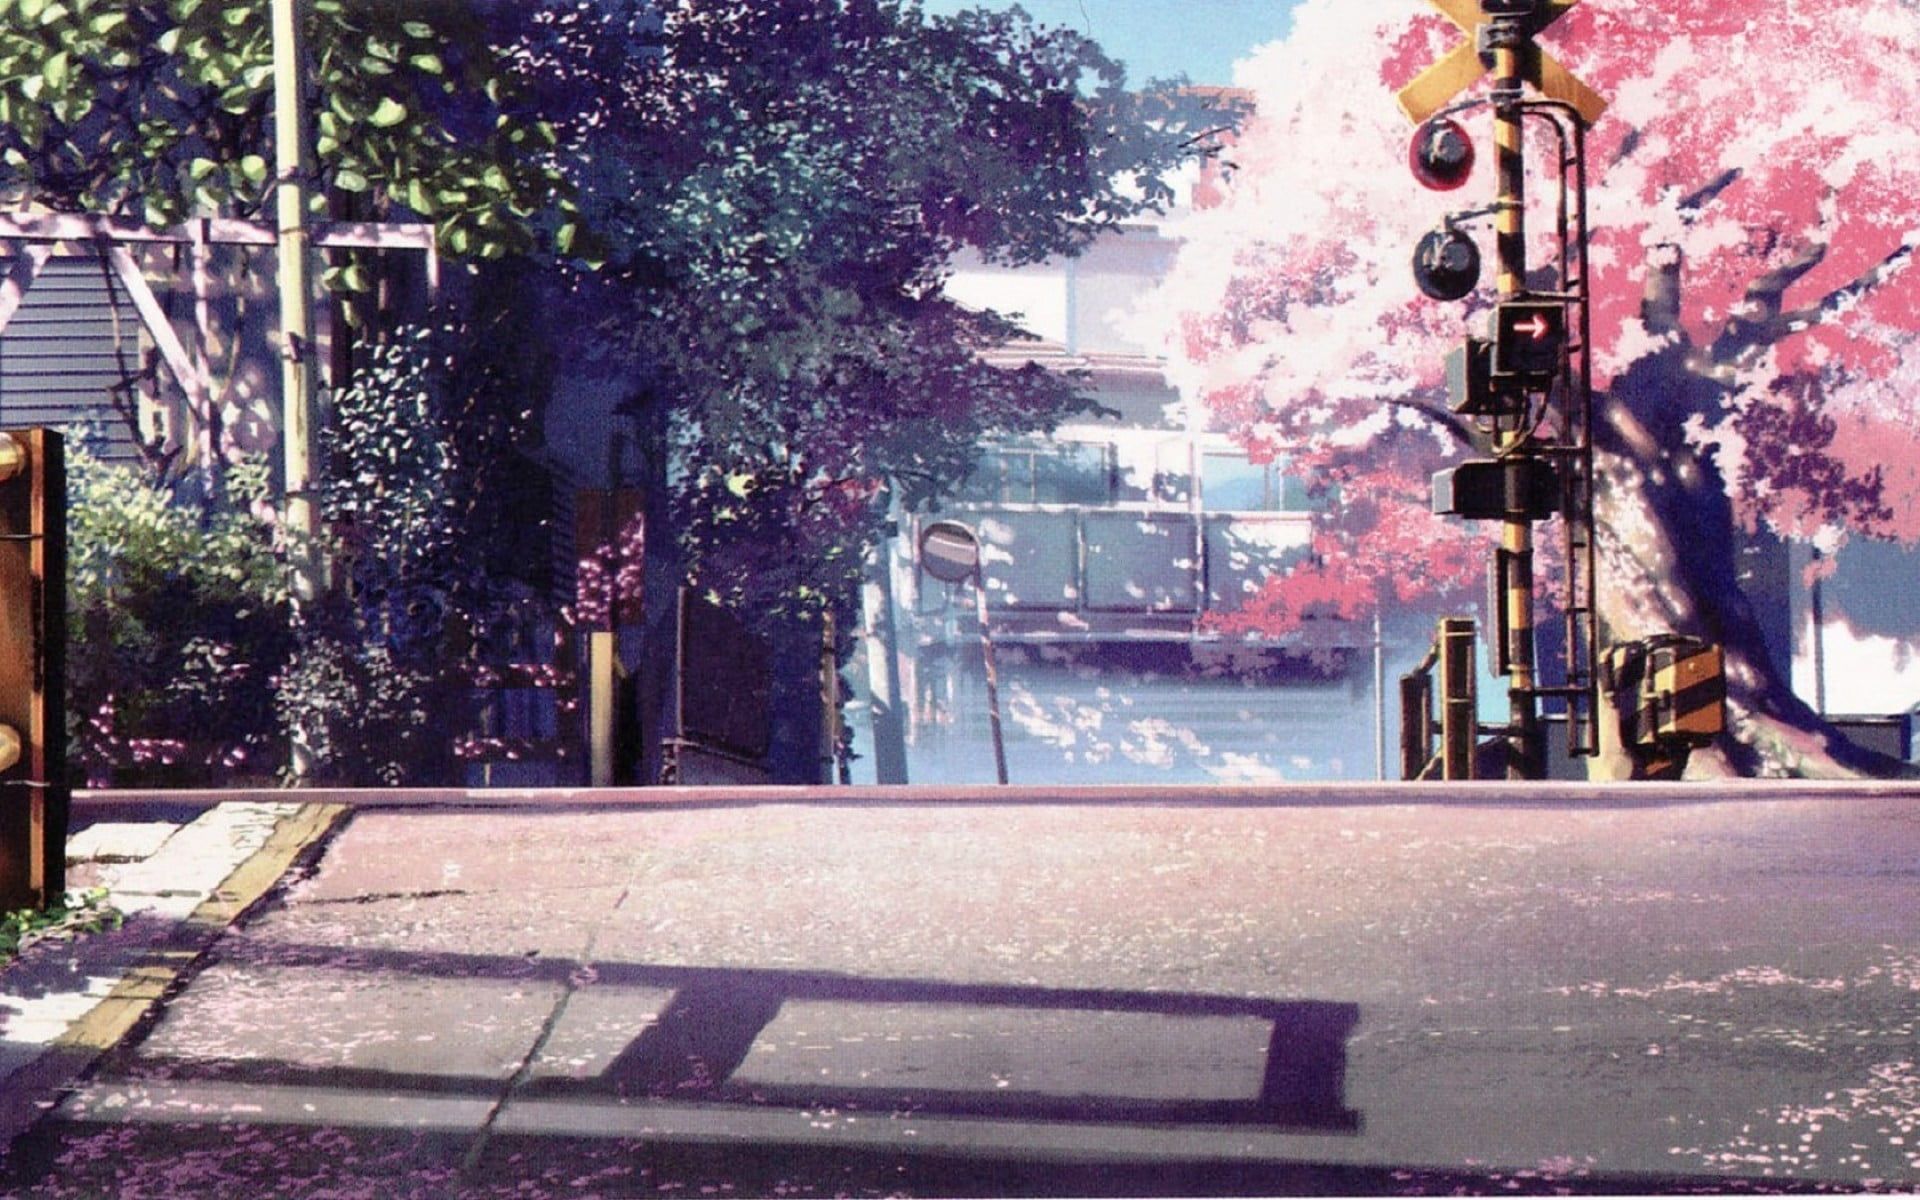 Pink leafed tree, anime, landscape, 5 Centimeters Per Second